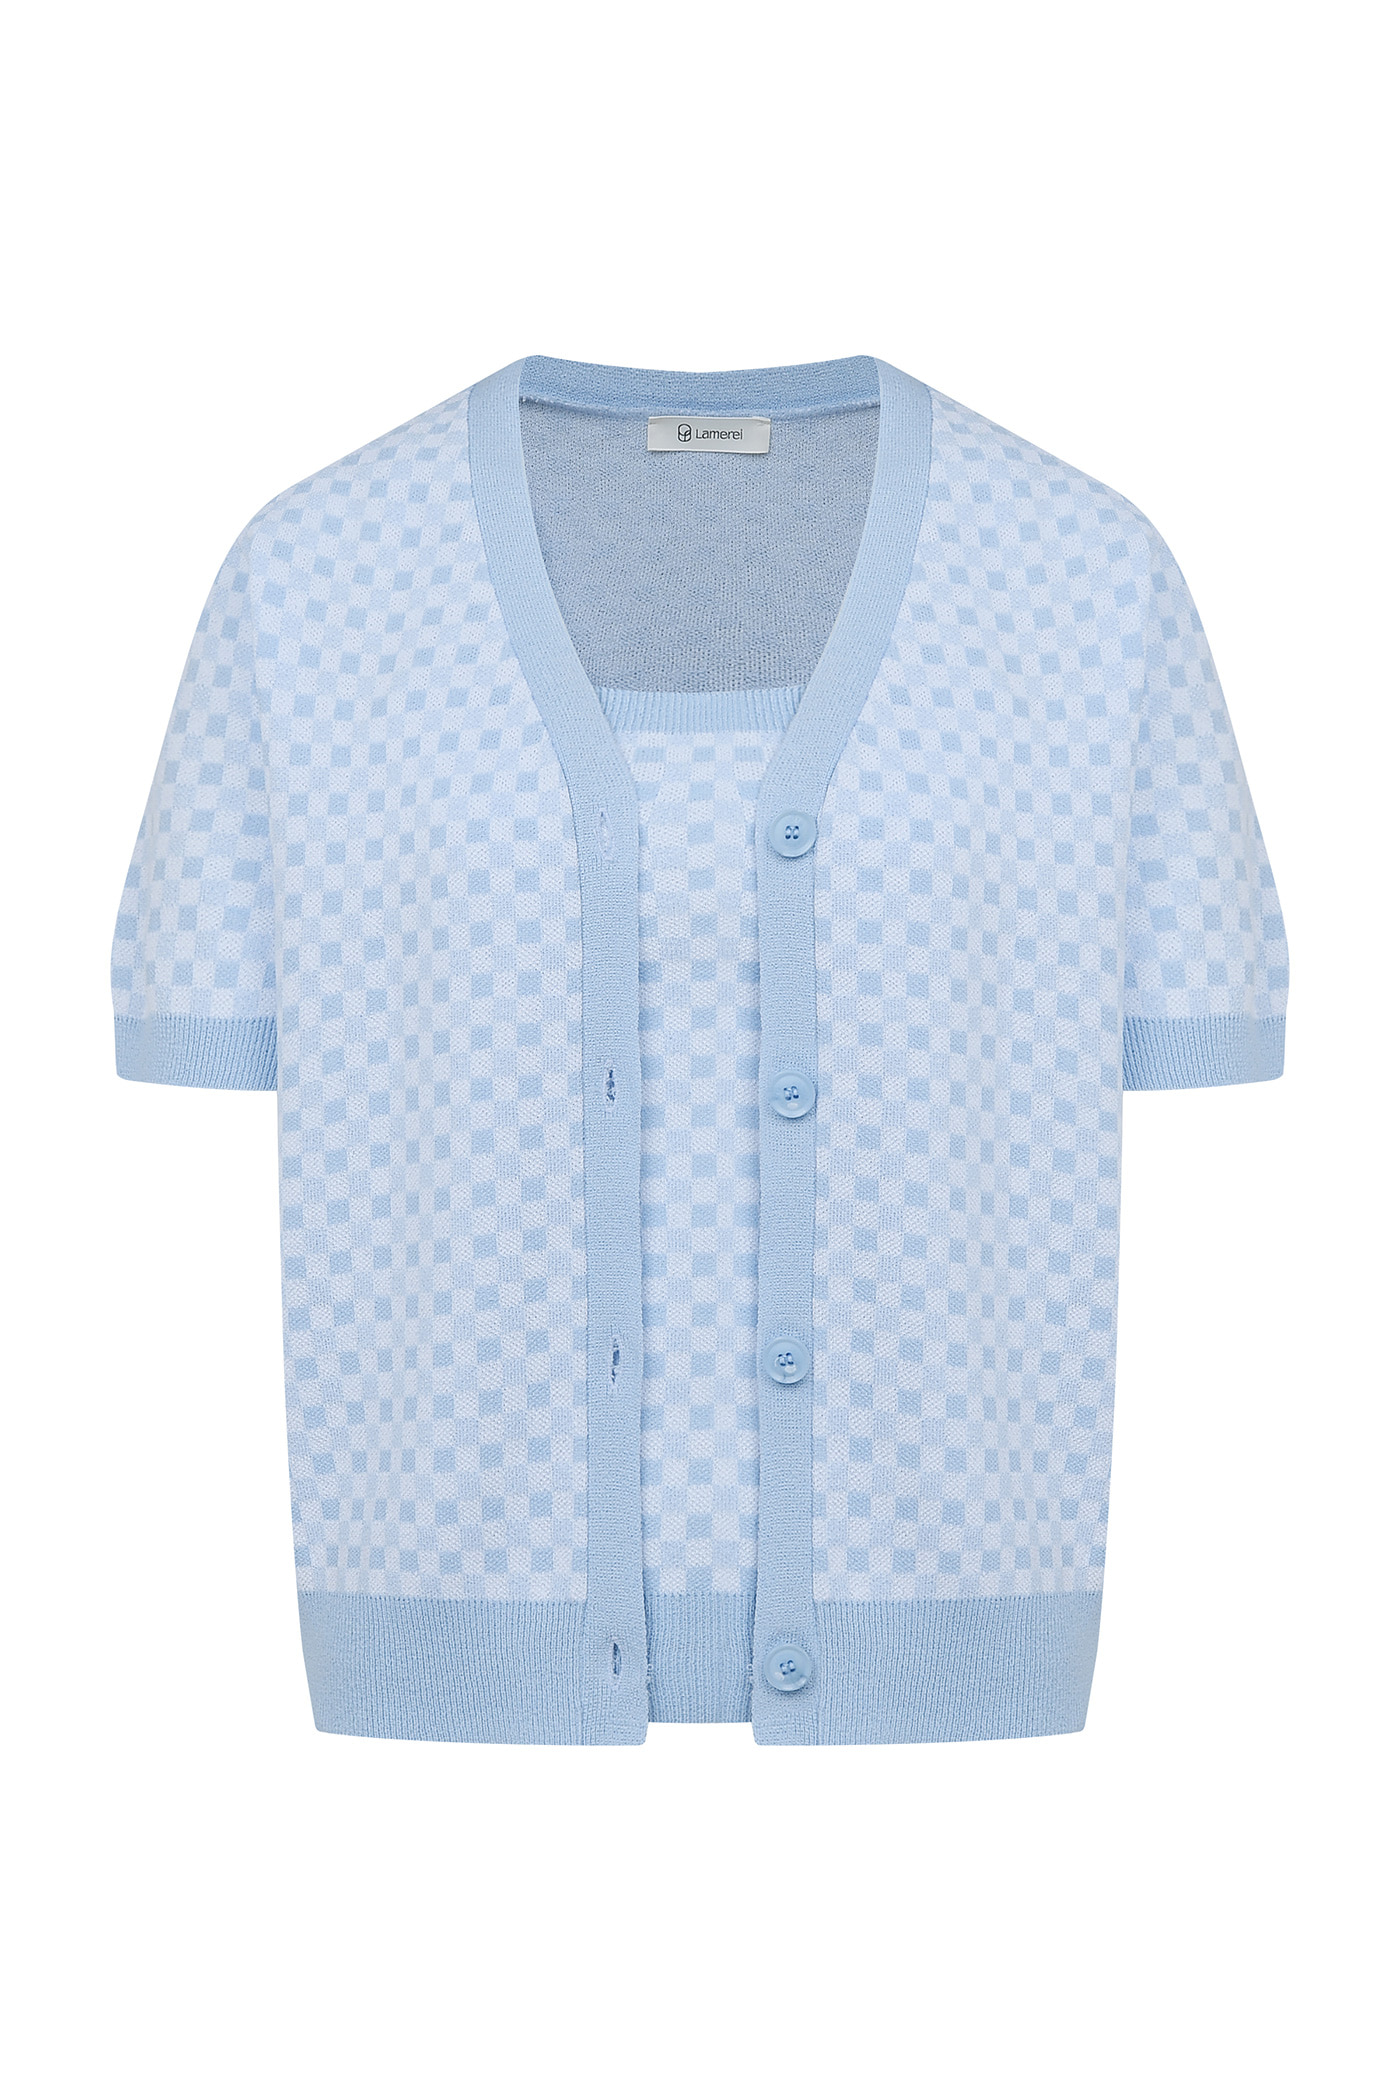 Gingham Check Sleeveless Knit Top-Sky Blue